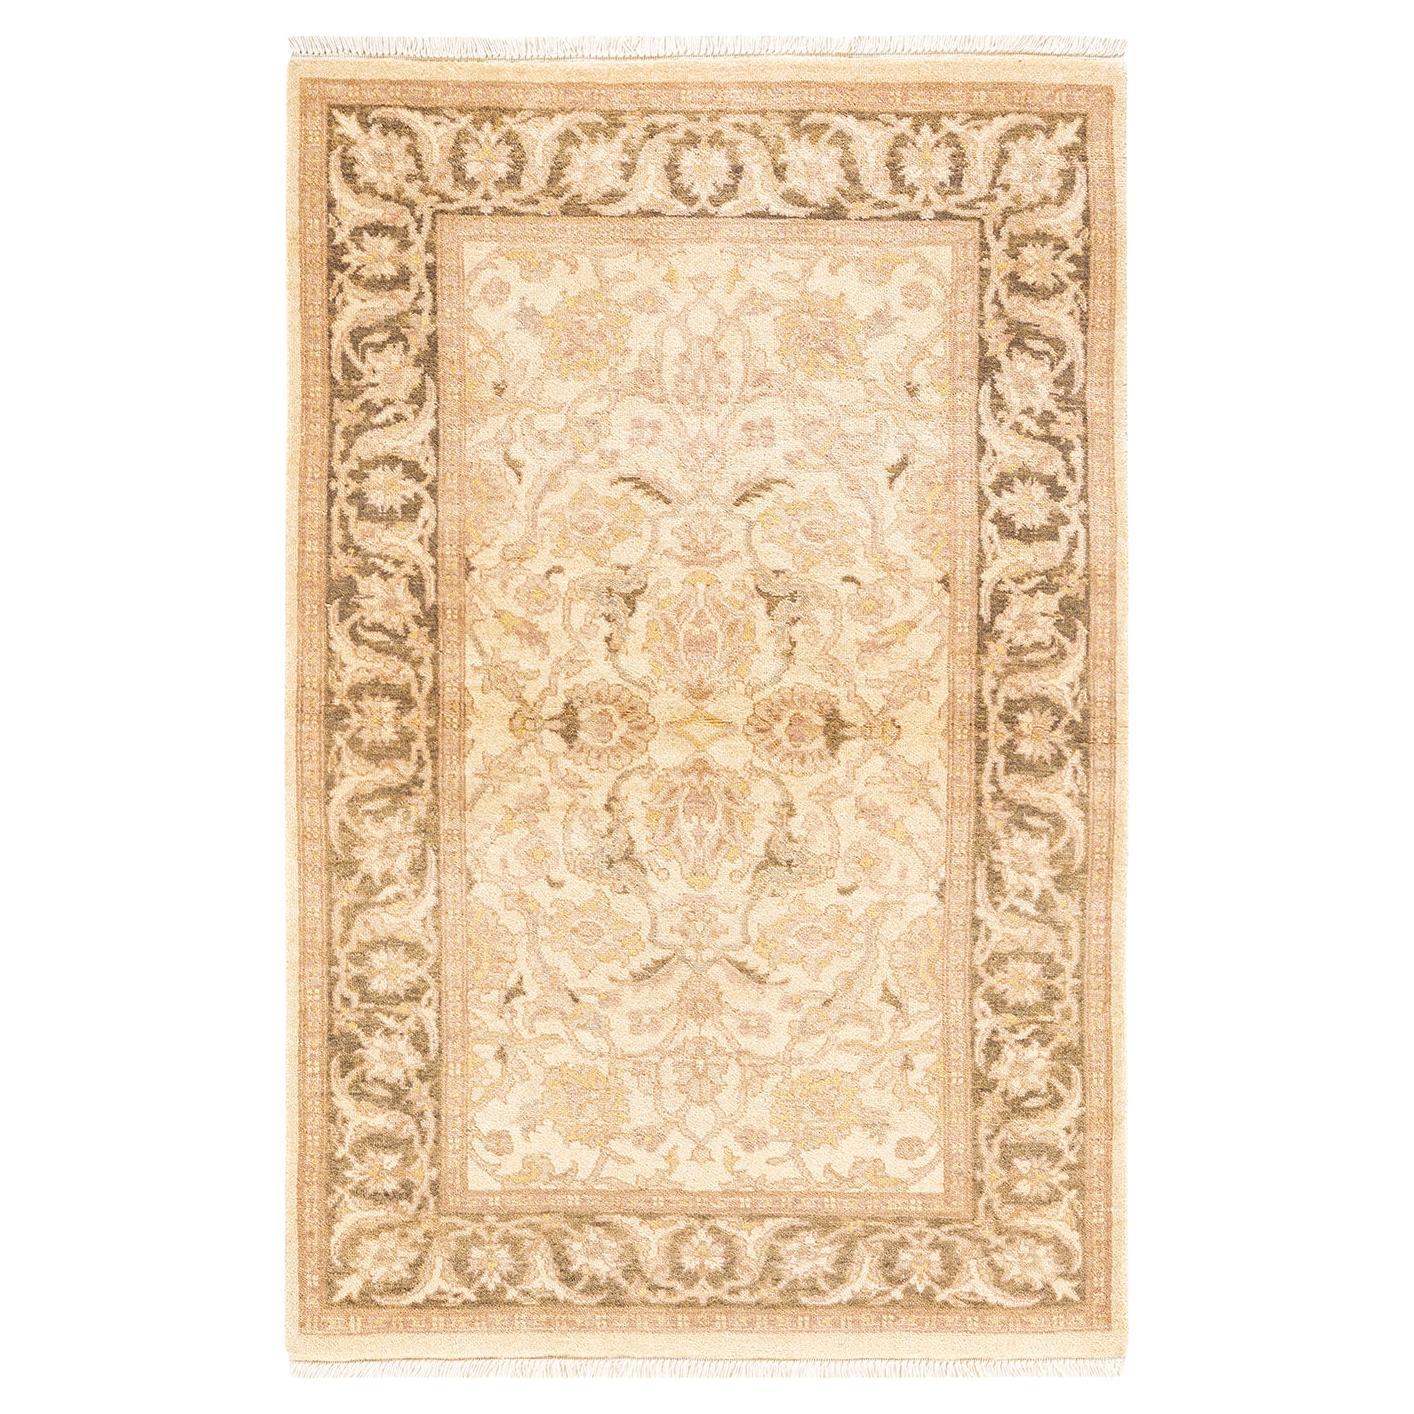 One-of-a-kind Hand Knotted Floral Eclectic Ivory Area Rug